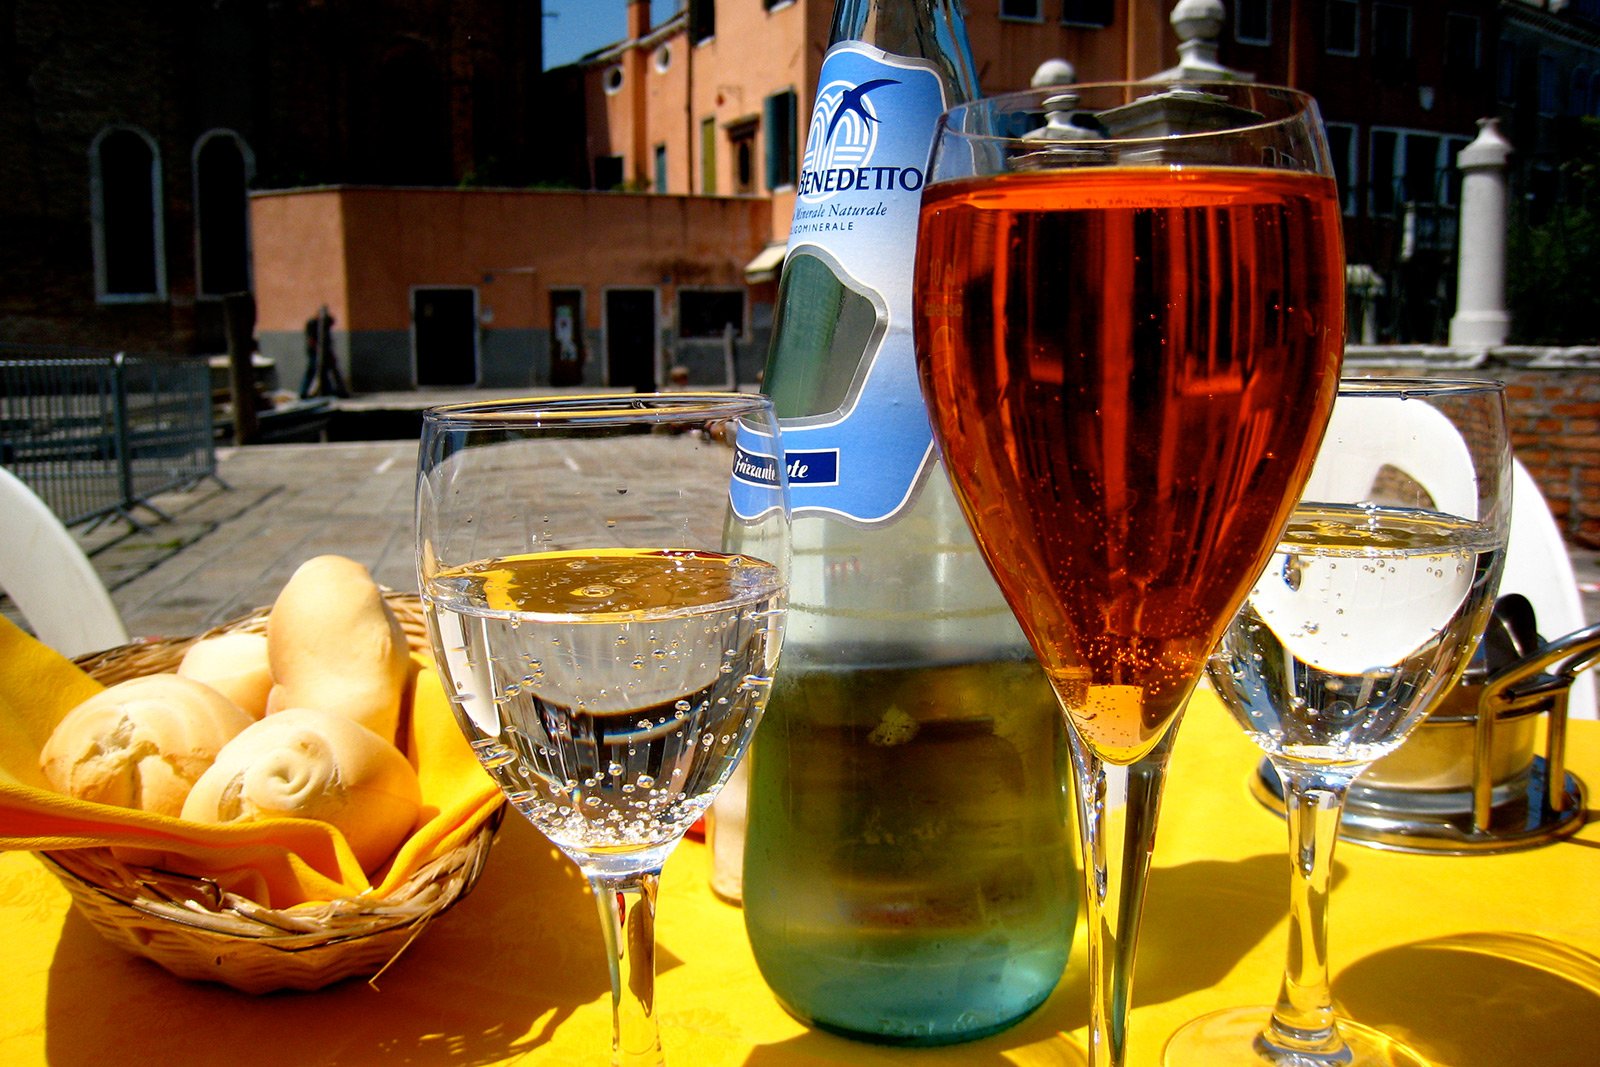 How to try spritz in Venice